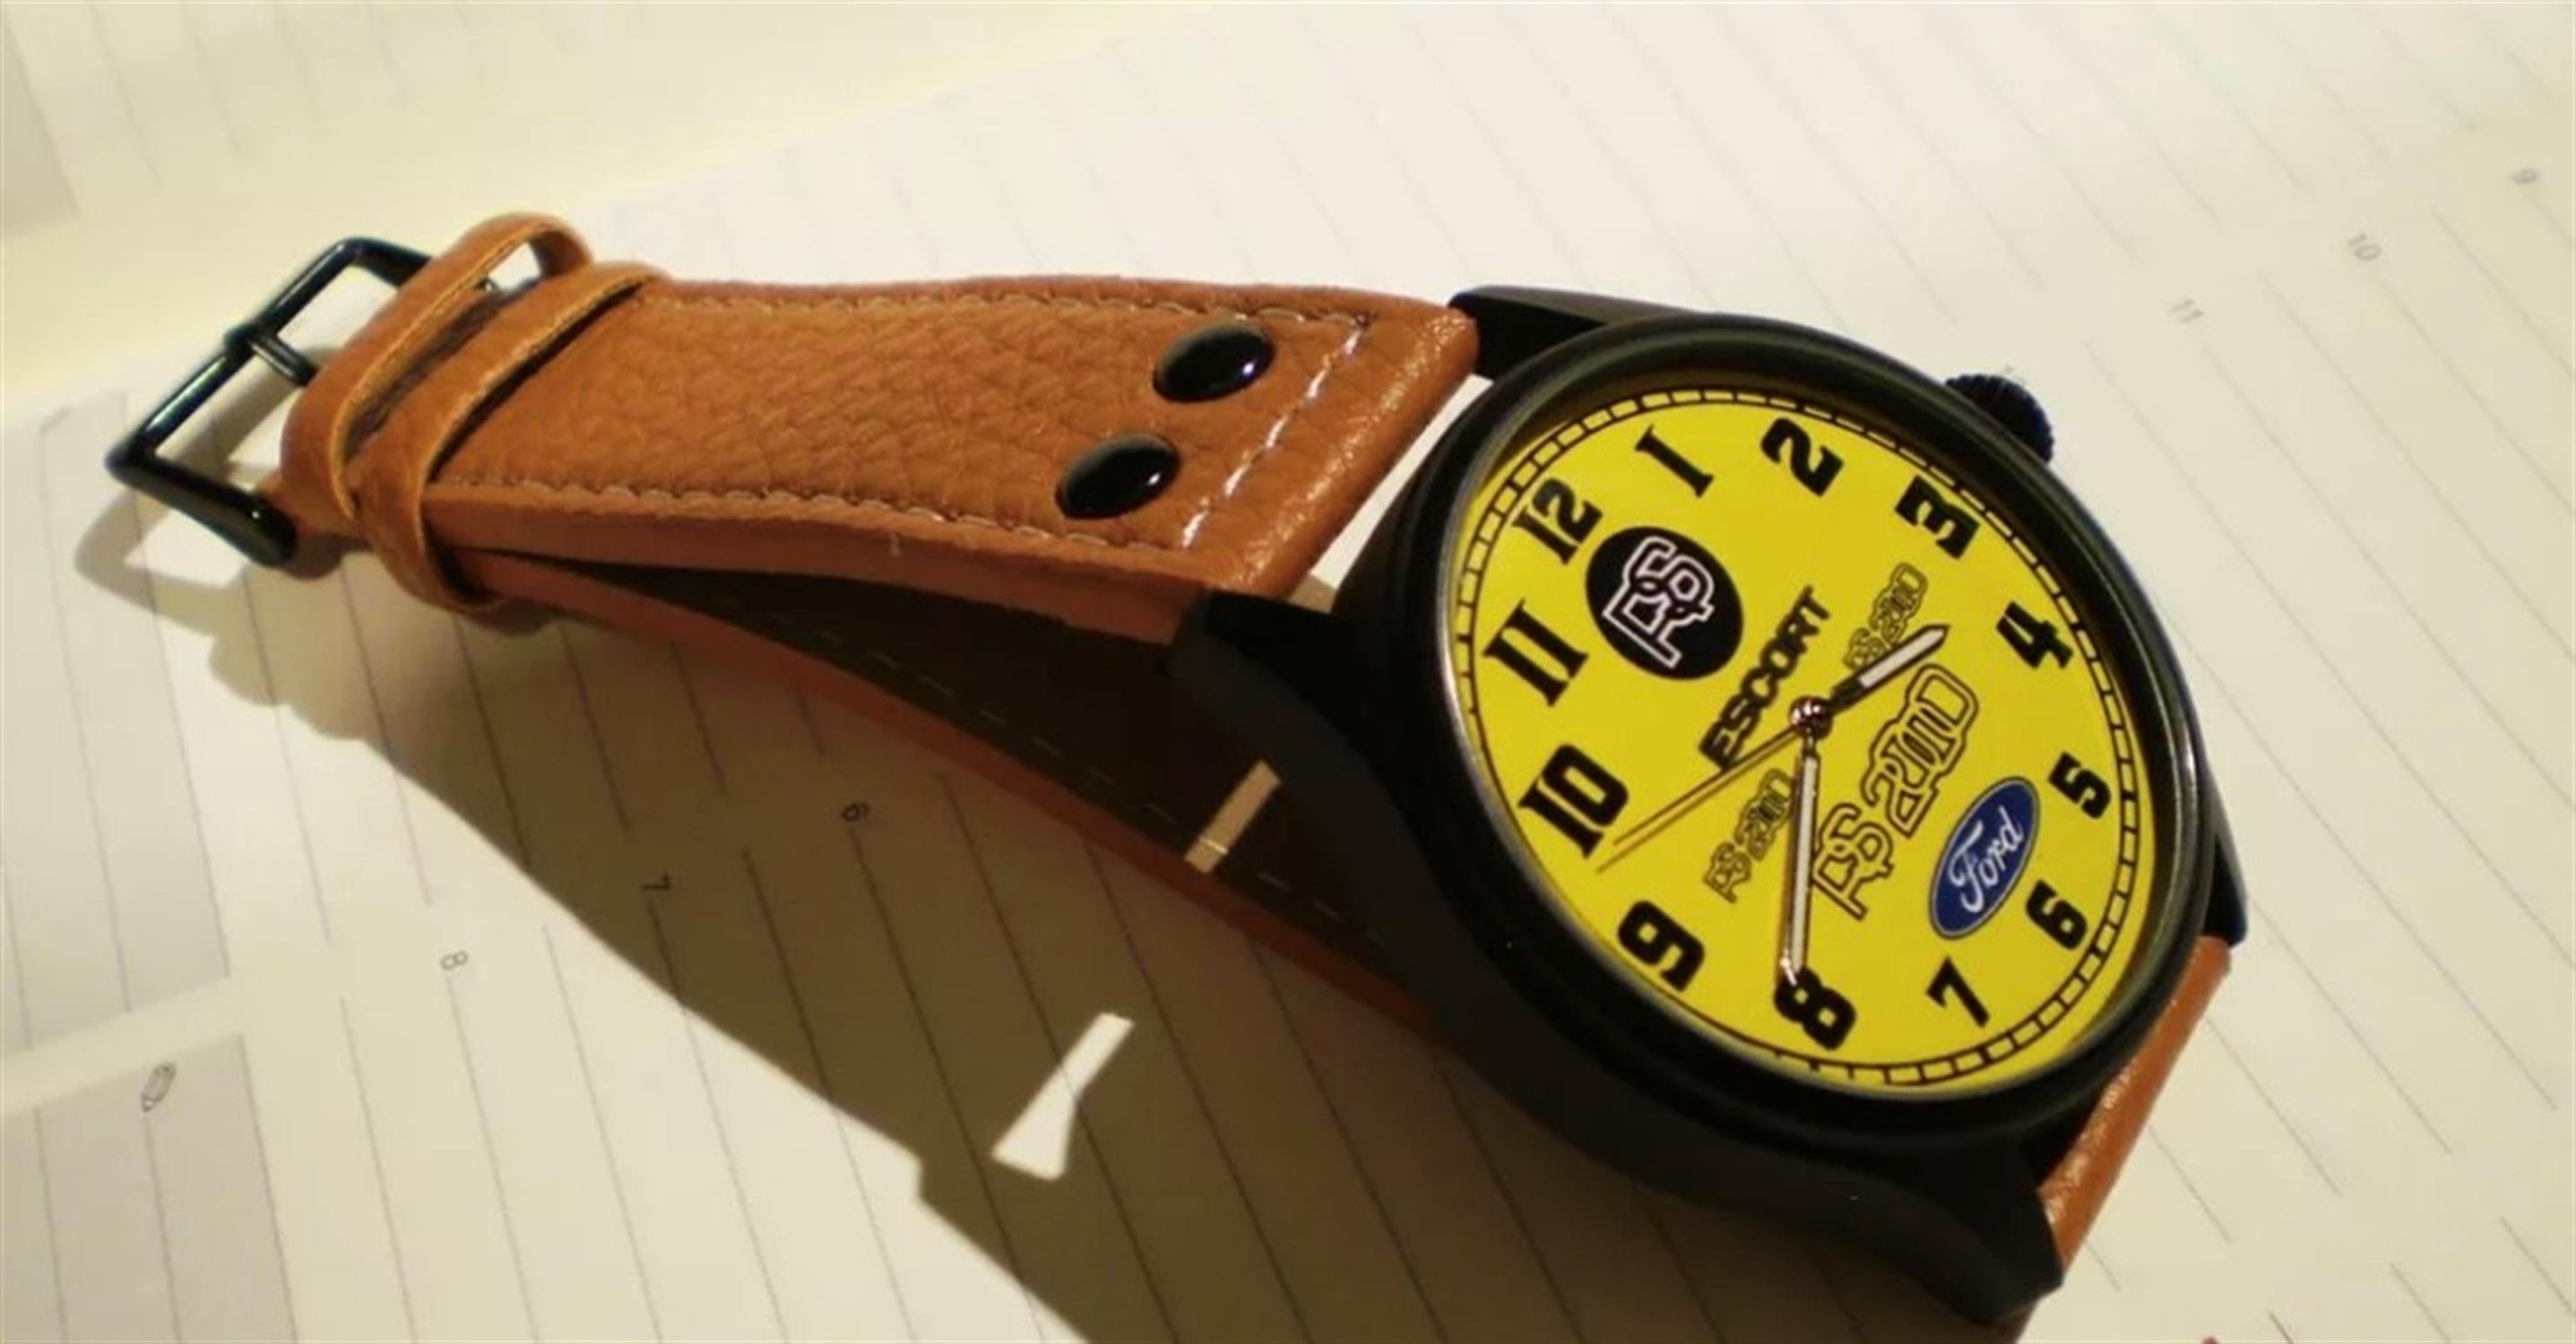 A Contemporary Ford Escort RS2000 Homage Dress Watch - Image 2 of 4